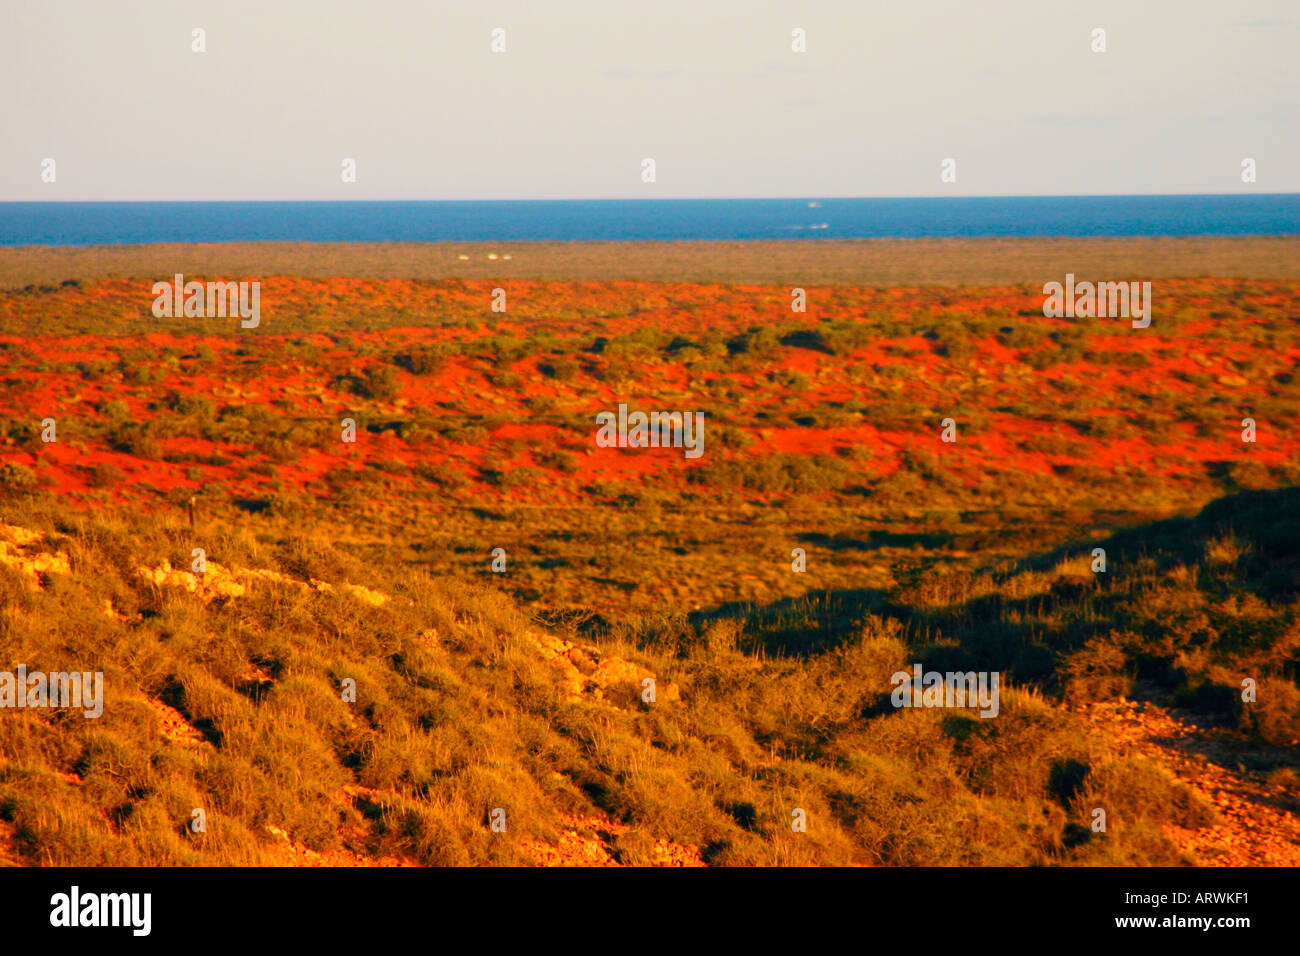 Spinifex growing in red soil on North West Cape next to blue Indian Ocean waters near Exmouth Western Australia Stock Photo